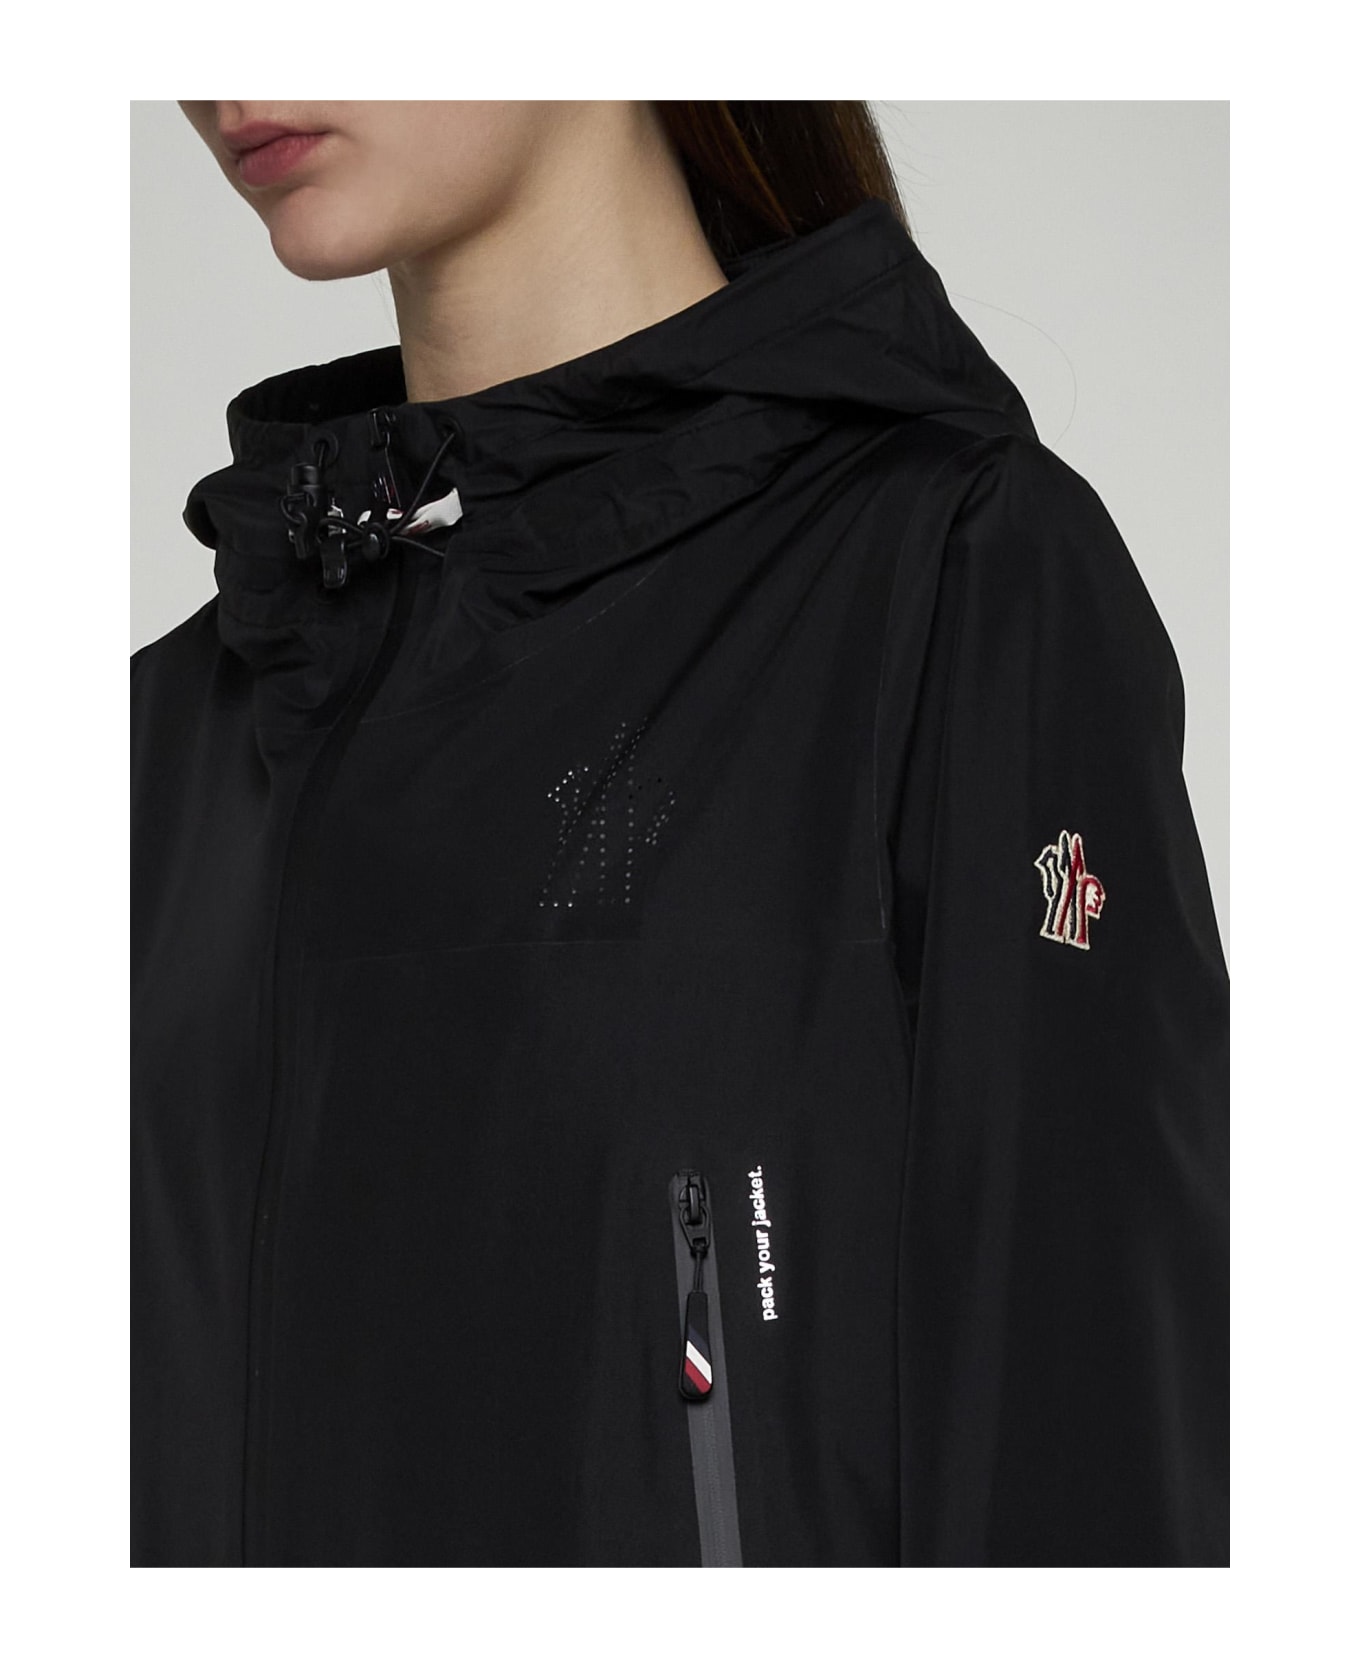 Moncler Grenoble Fanes Technical Fabric Jacket